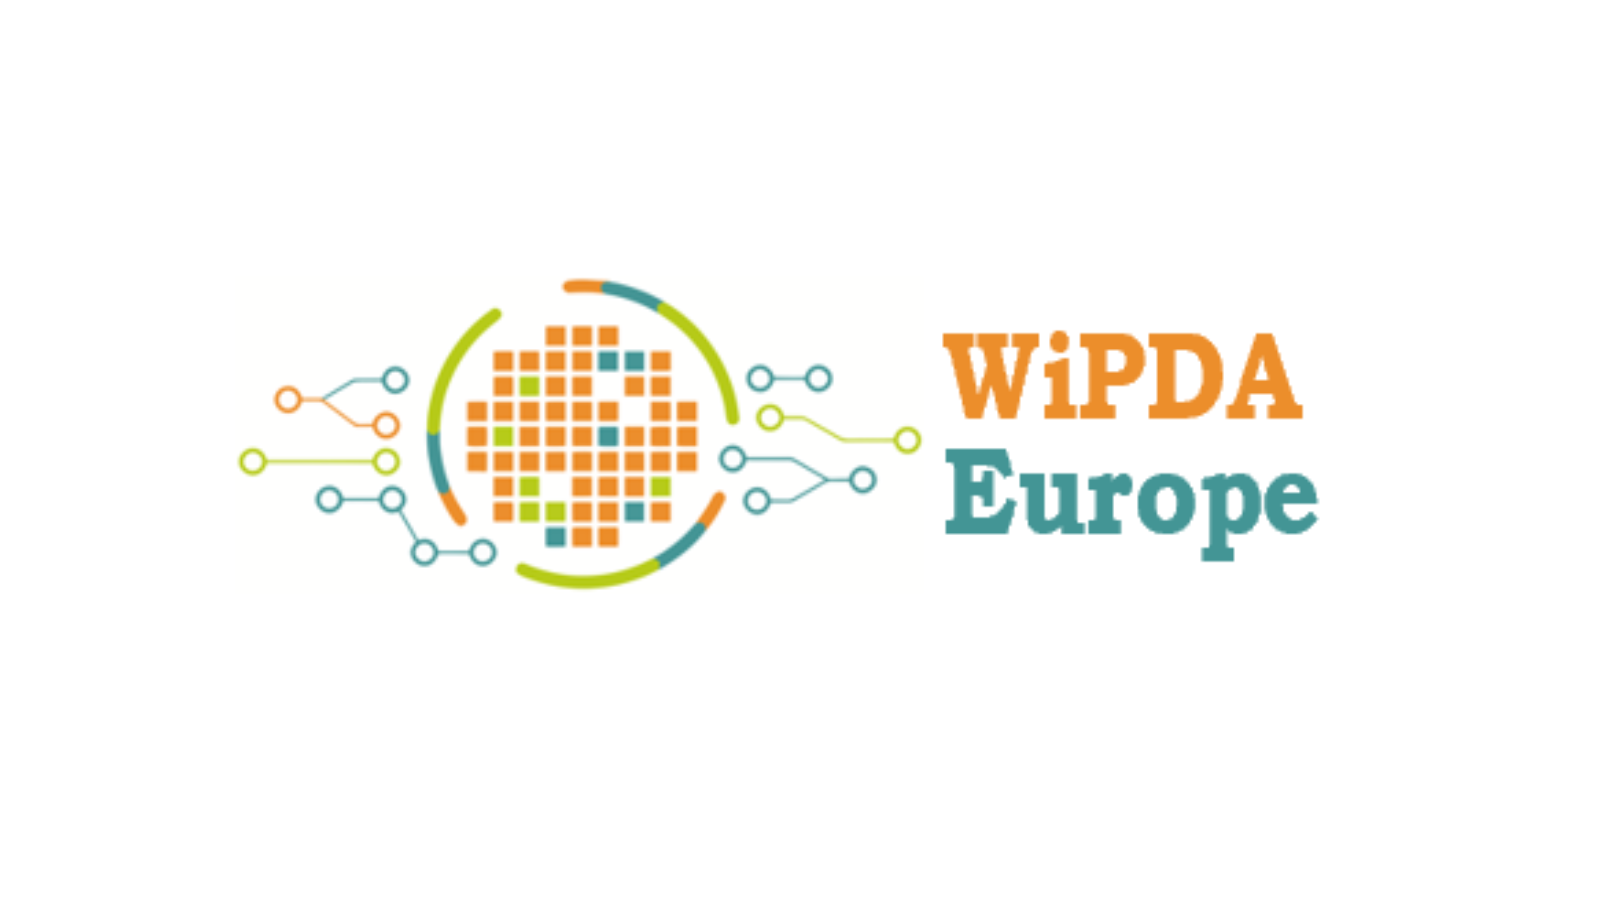 Logo of WiPDA Europe featuring a stylized map composed of colored squares and electronic circuit lines branching out. The text "WiPDA Europe" is placed to the right, with "WiPDA" in orange and "Europe" in teal. The background is white. - CSA Catapult